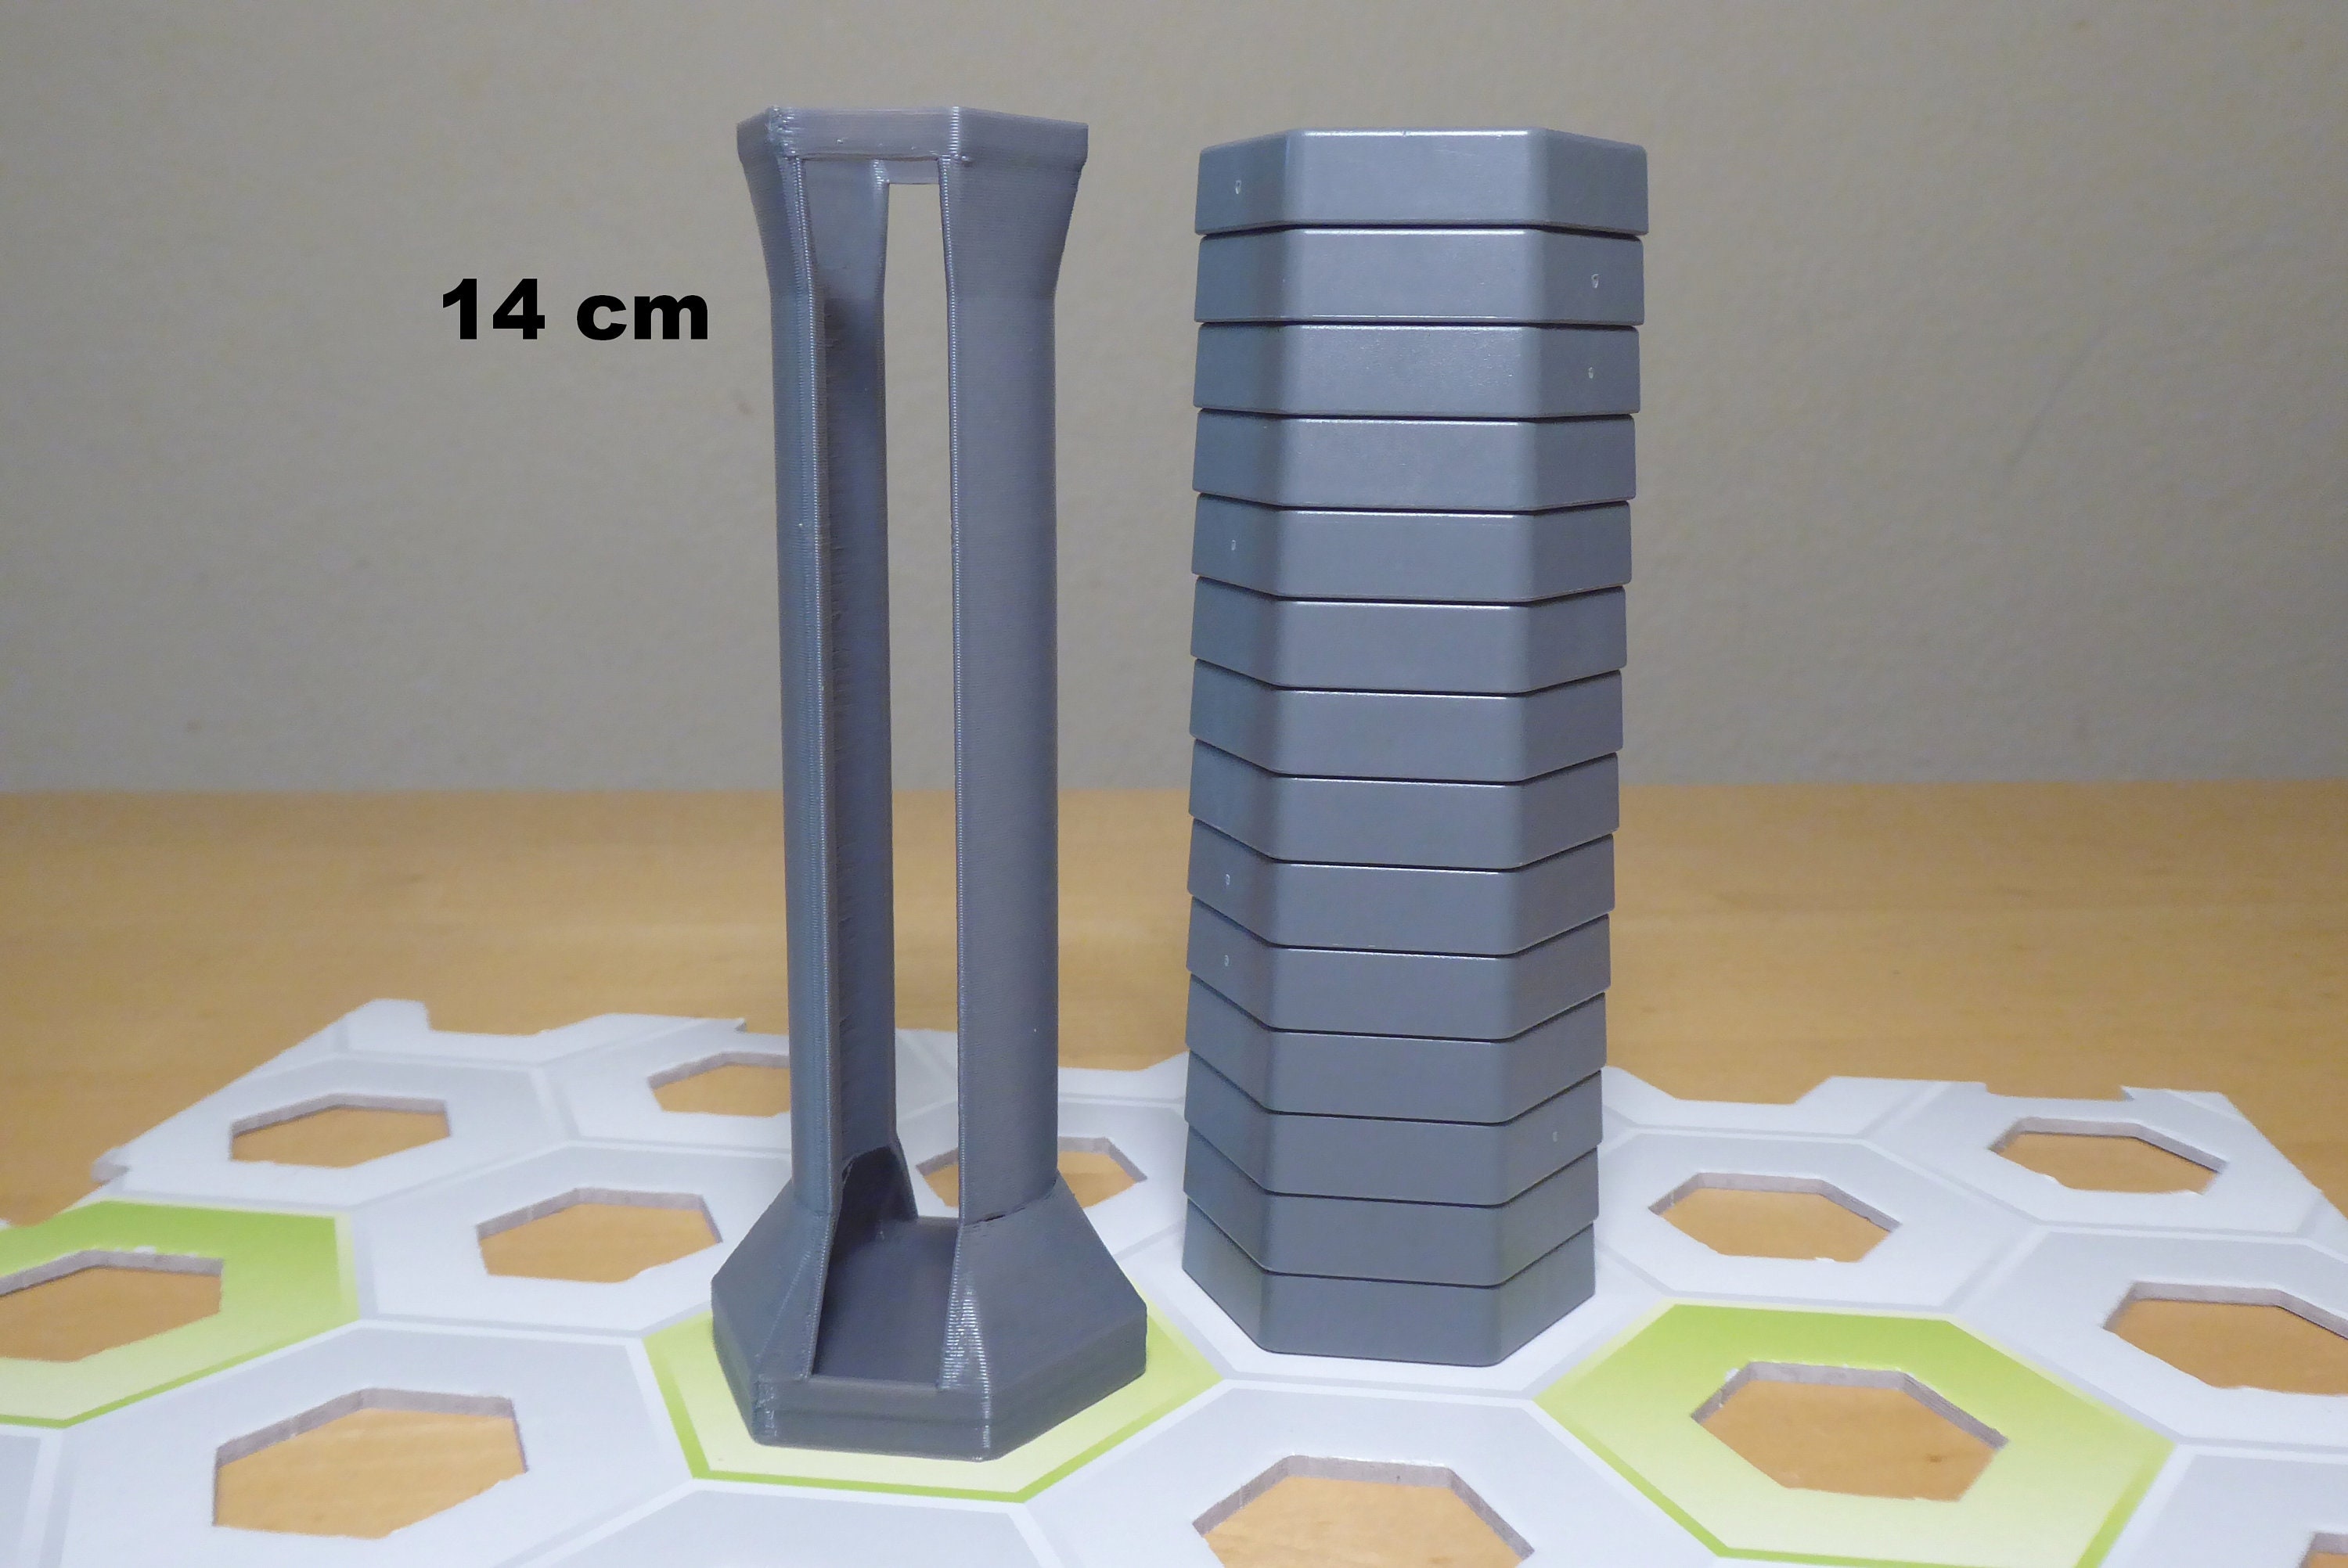 Gravitrax Compatible Electric Lift up to 22 Cm High 3D Printing 